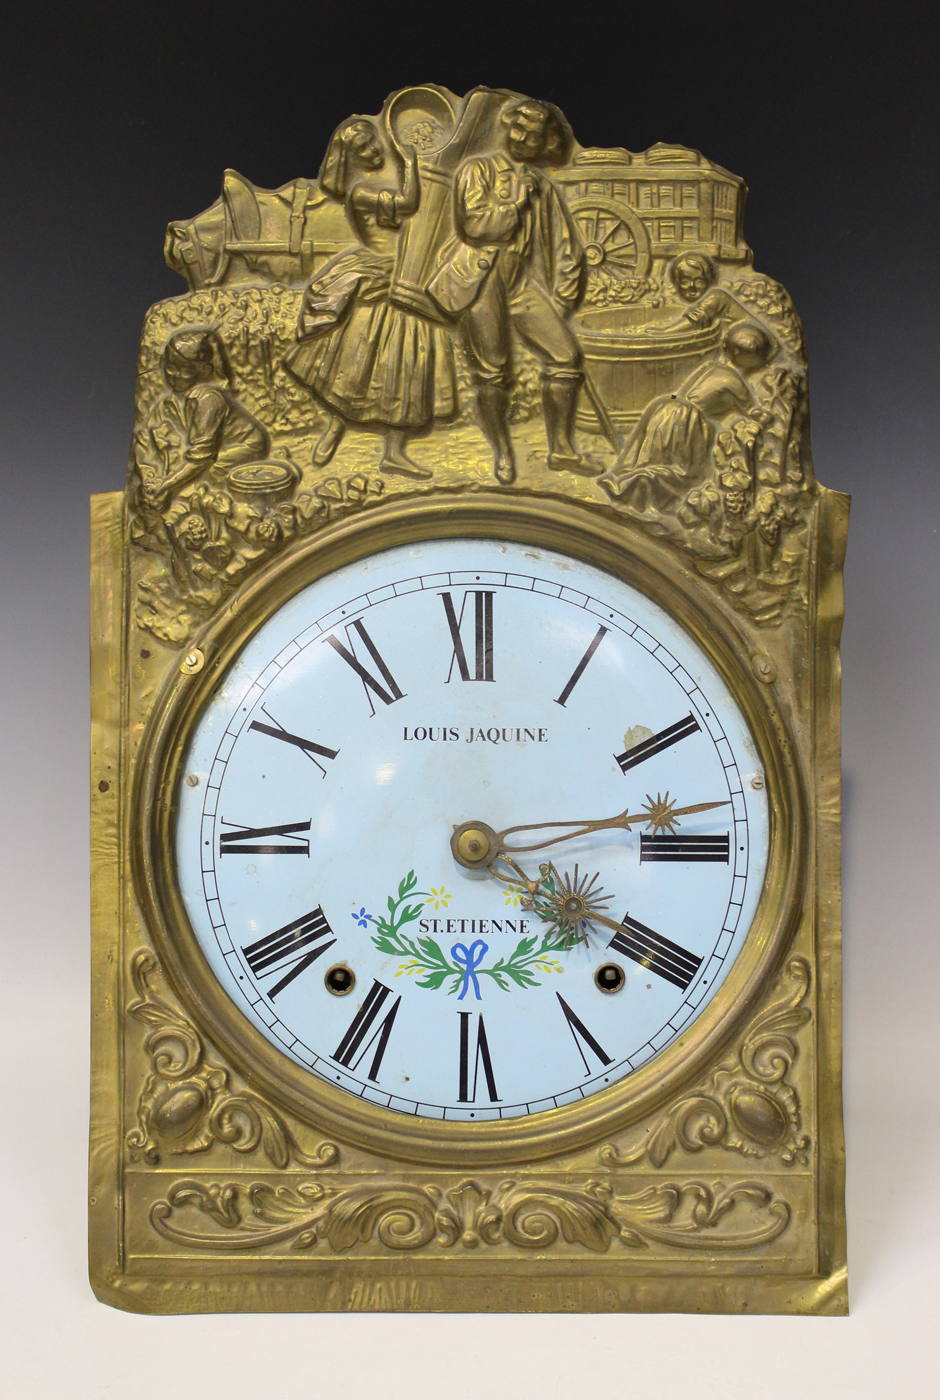 A 19th Century French Comtoise Or Morbier Brass Cased Wall Clock With